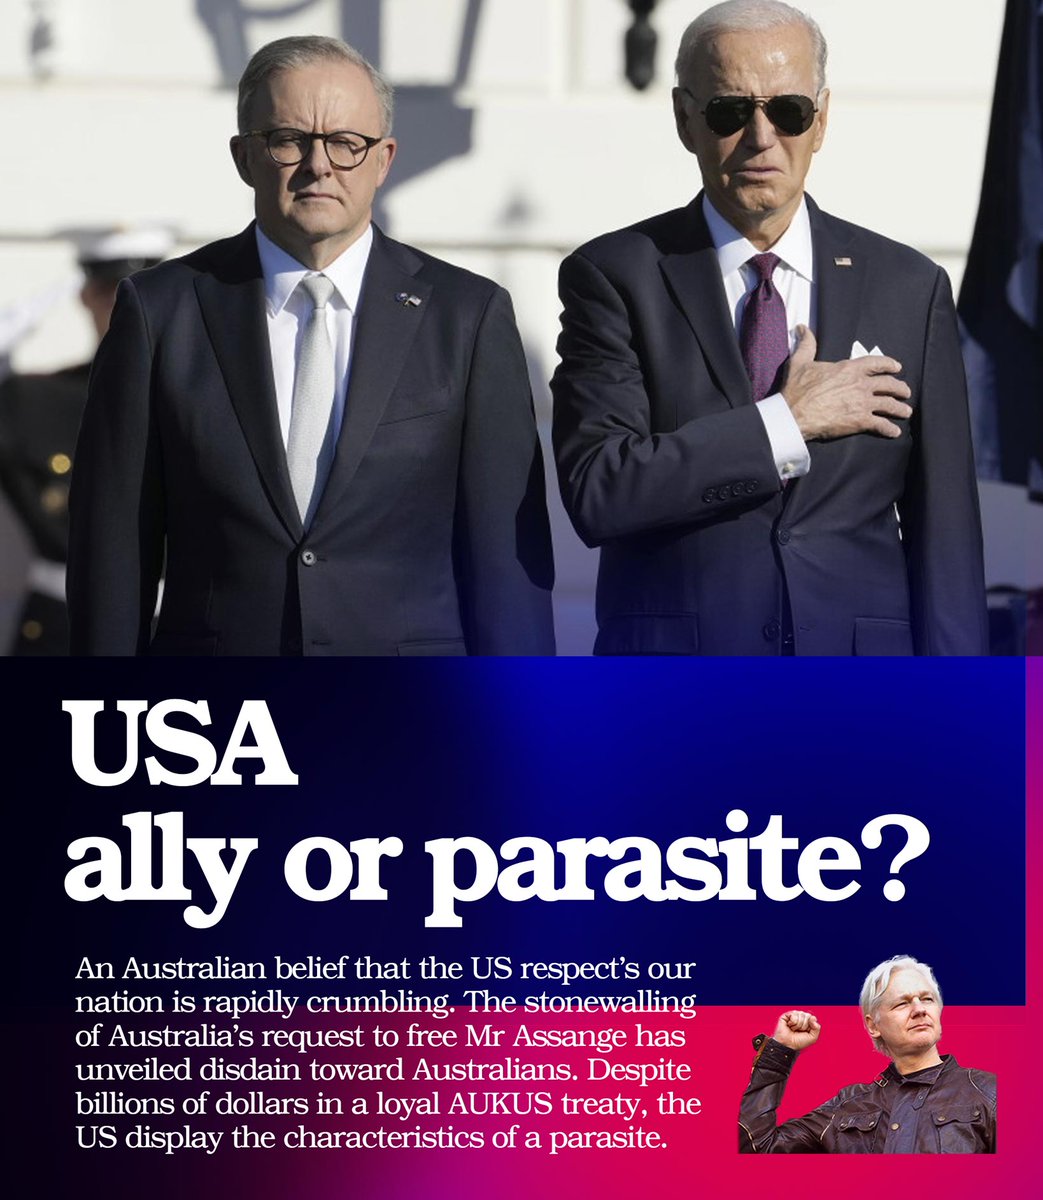 The US displays all the characteristics of a parasite.
Despite billions of dollars in a loyal AUKUS treaty between nations, the US has exhibited outward contempt, snubbing a modest Australian Government request to end prosecution against it's award winning journalist, Mr Assange.